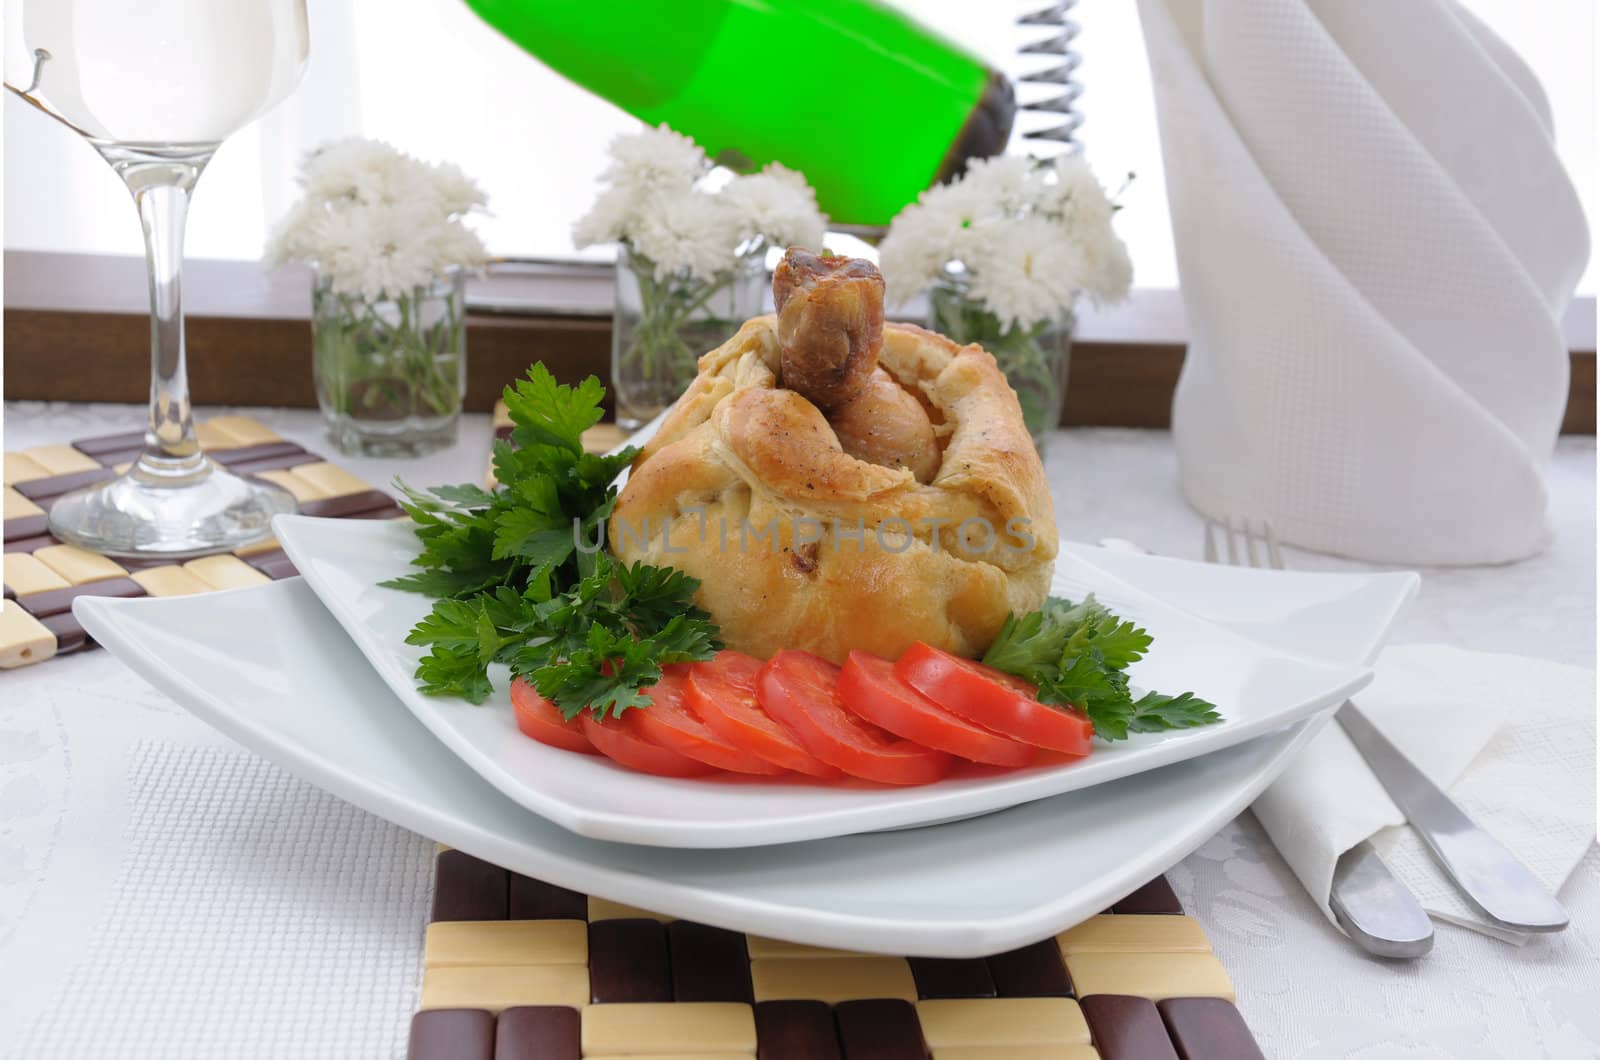 Chicken leg stuffed with mushrooms in pastry by Apolonia